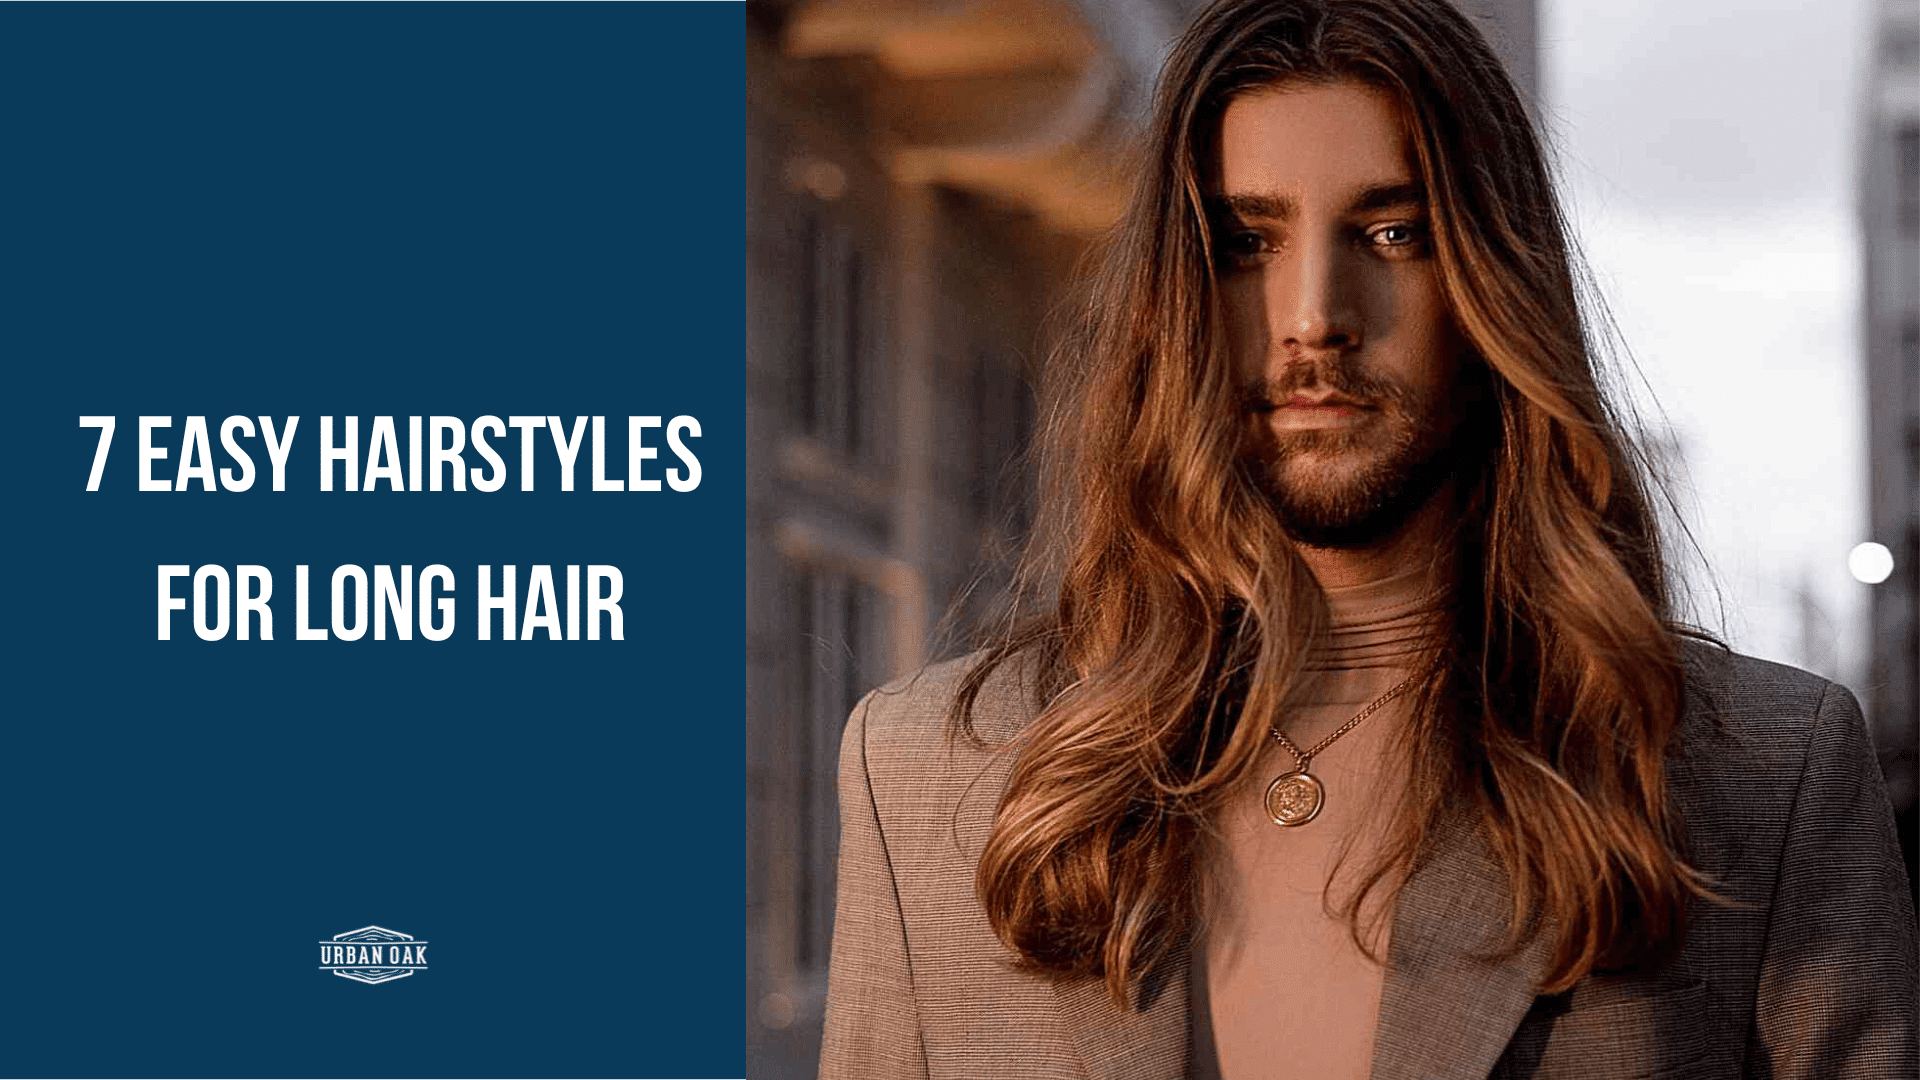 7 Easy Hairstyles for Long Hair